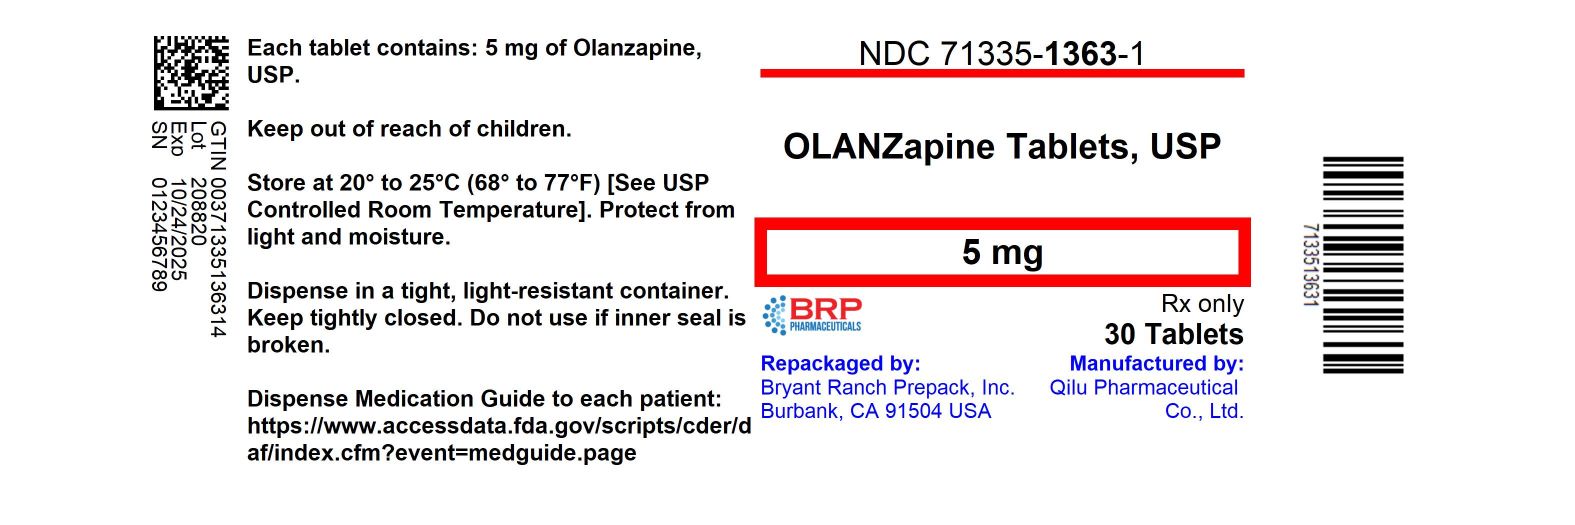 Is Olanzapine Olanzapine 500 Mg safe while breastfeeding